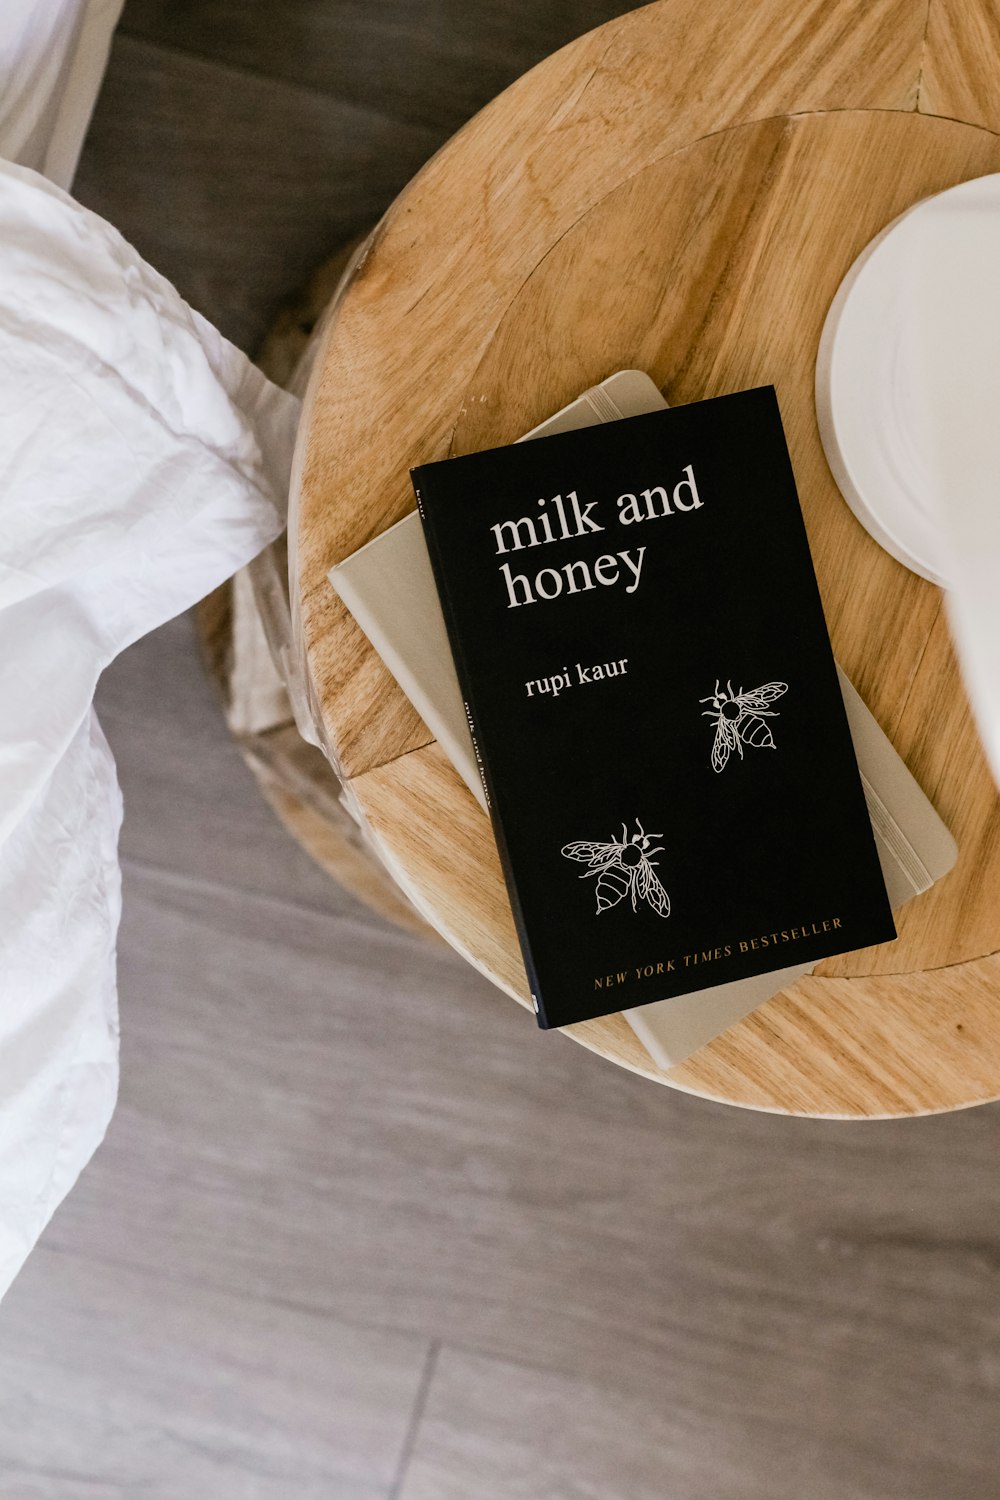 Milk and Honey by Rupi Kaur book on table